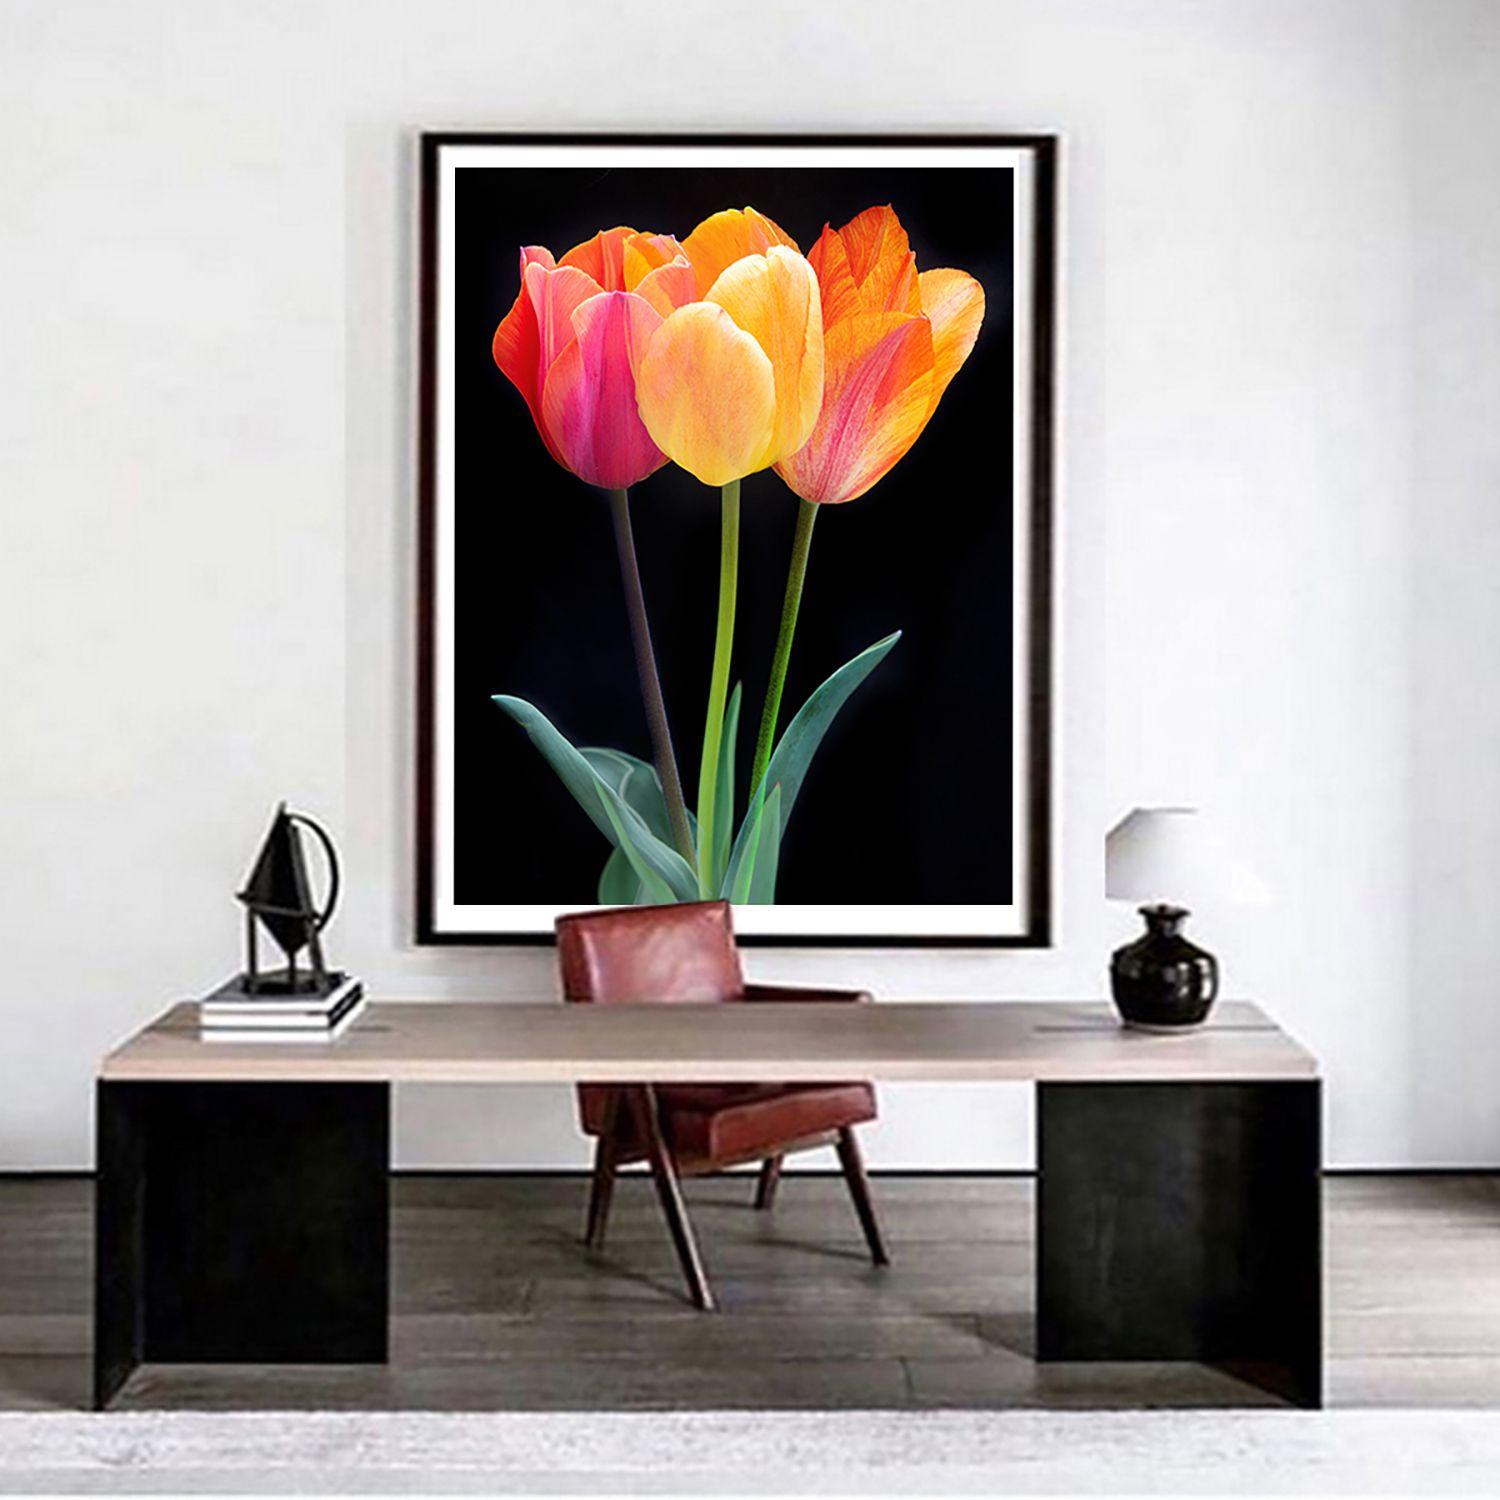 A color photograph a 3 tulips on black. Printed on Archival Fine Art Paper. :: Photograph :: Color :: This piece comes with an official certificate of authenticity signed by the artist :: Ready to Hang: No :: Signed: Yes :: Signature Location: